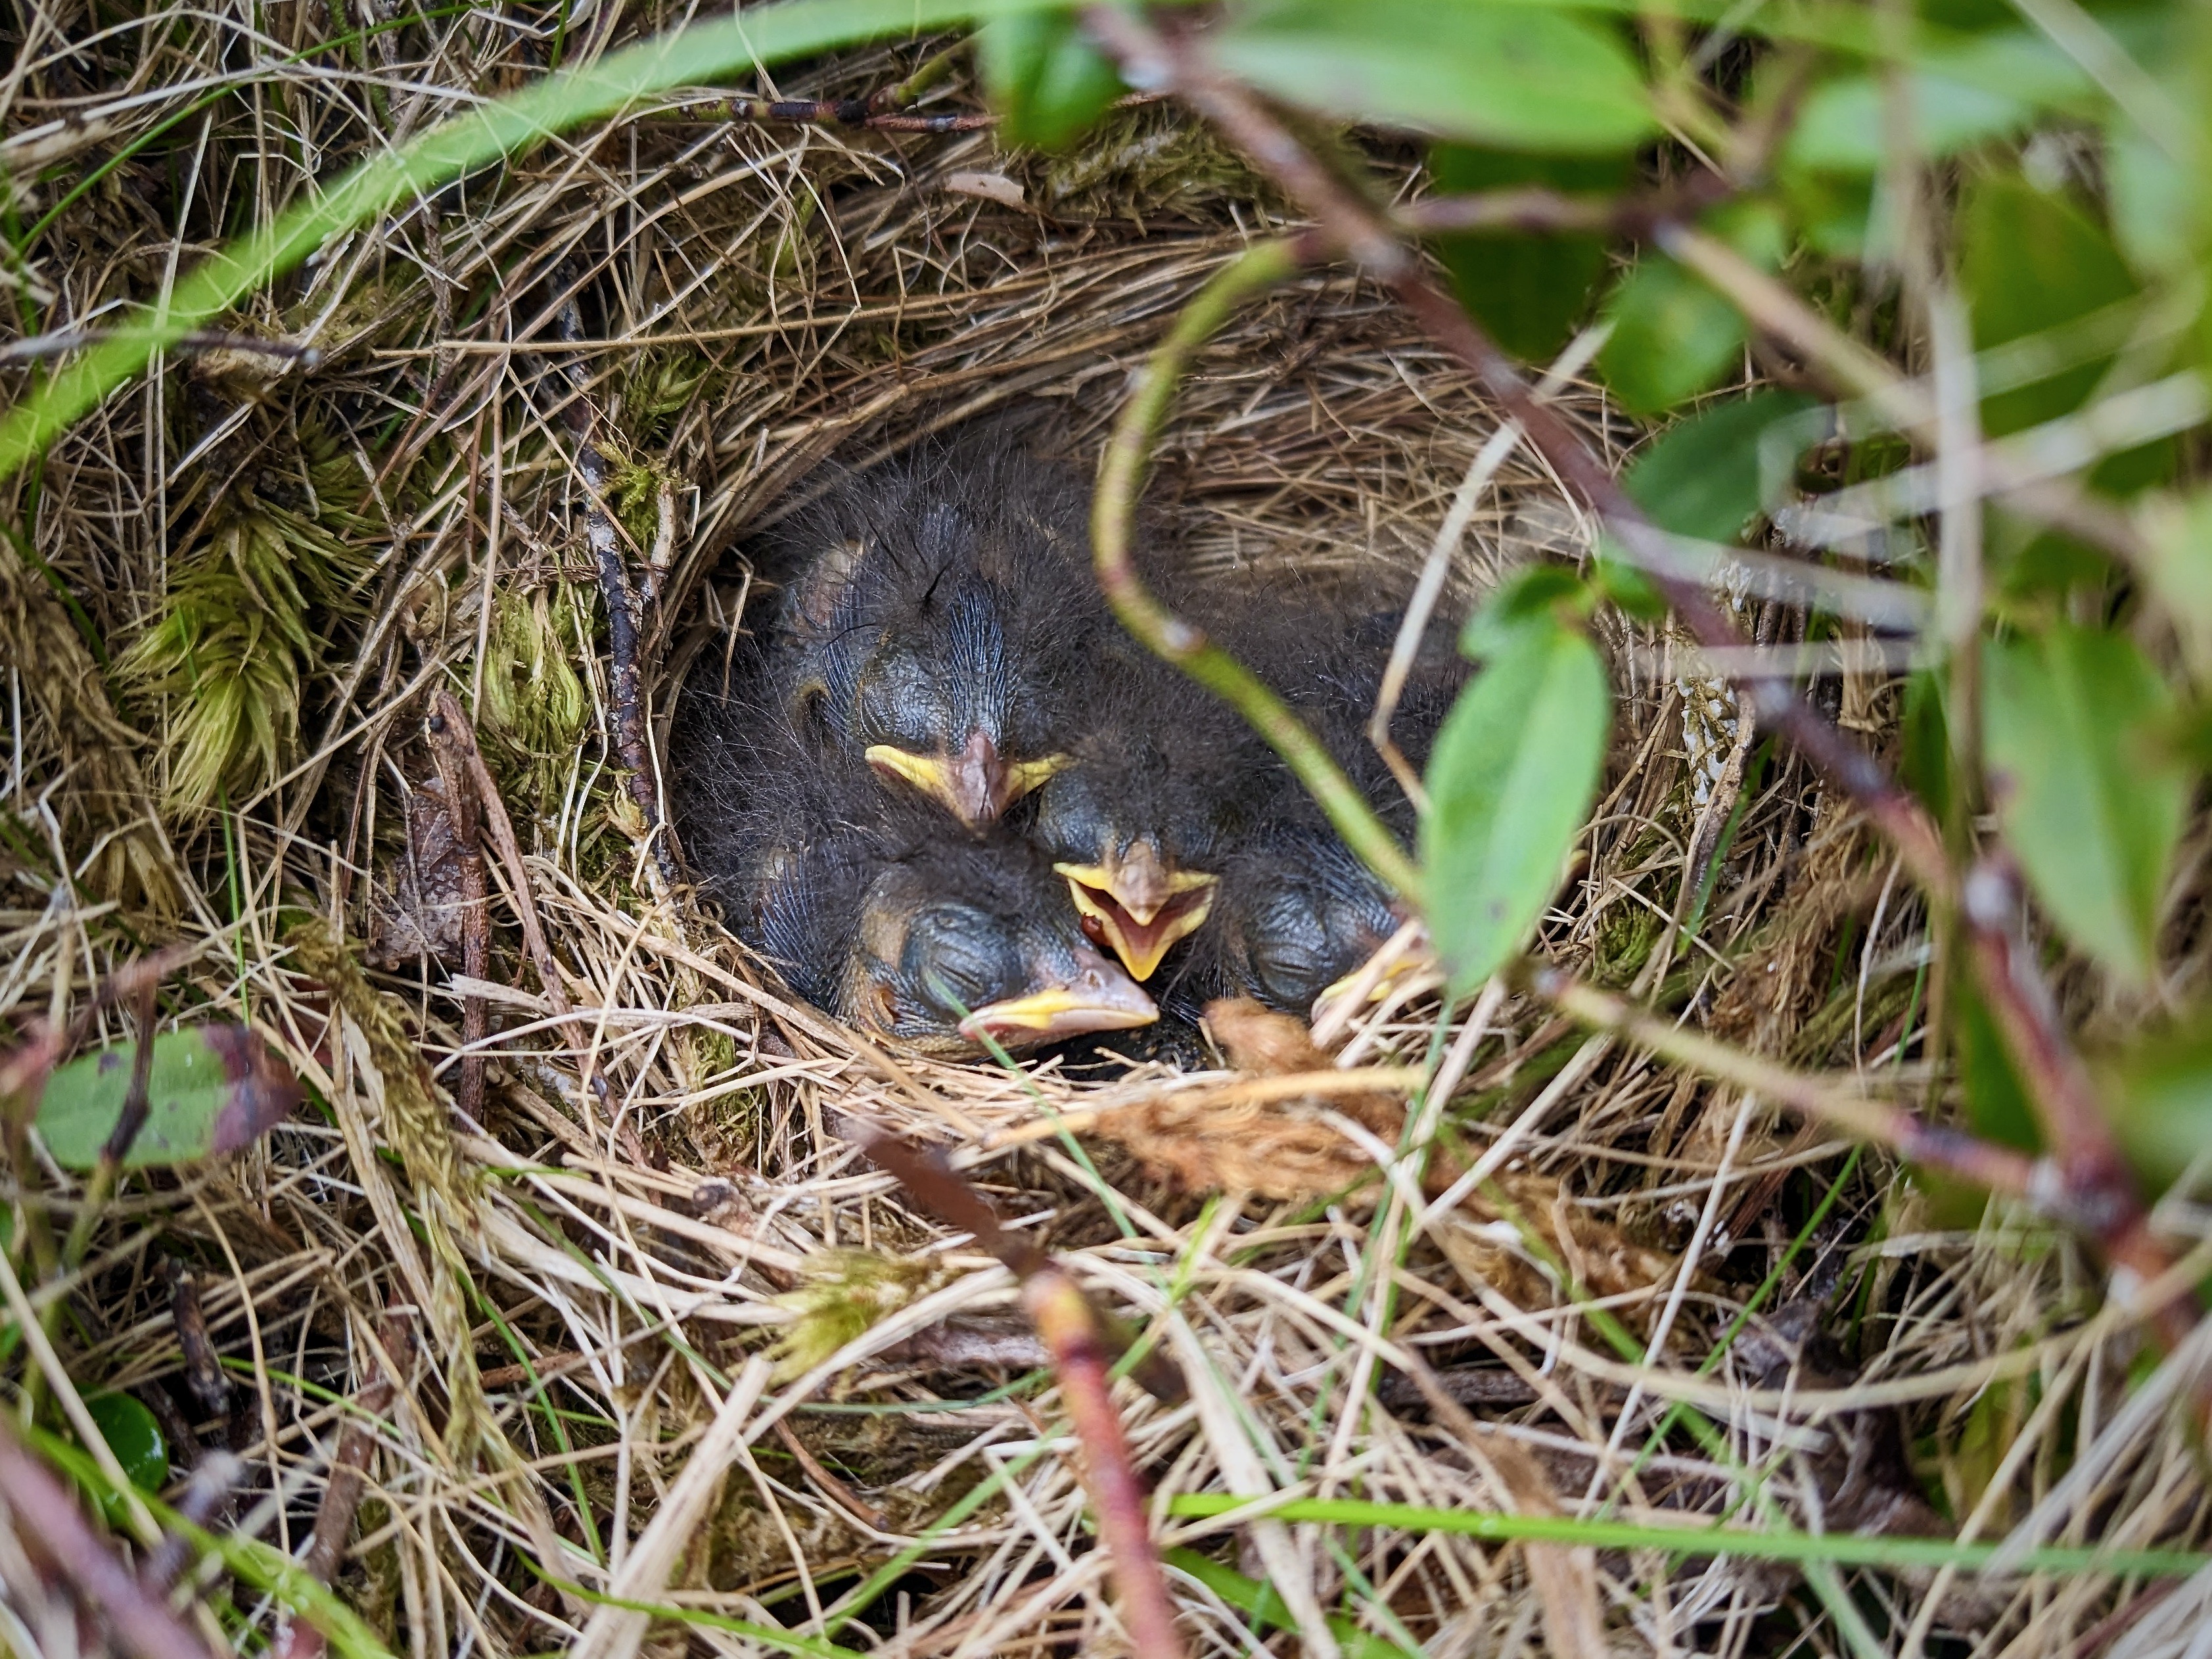 Four Savannah sparrow nestlings in a nest woven from grass, surrounded by leaves and moss.